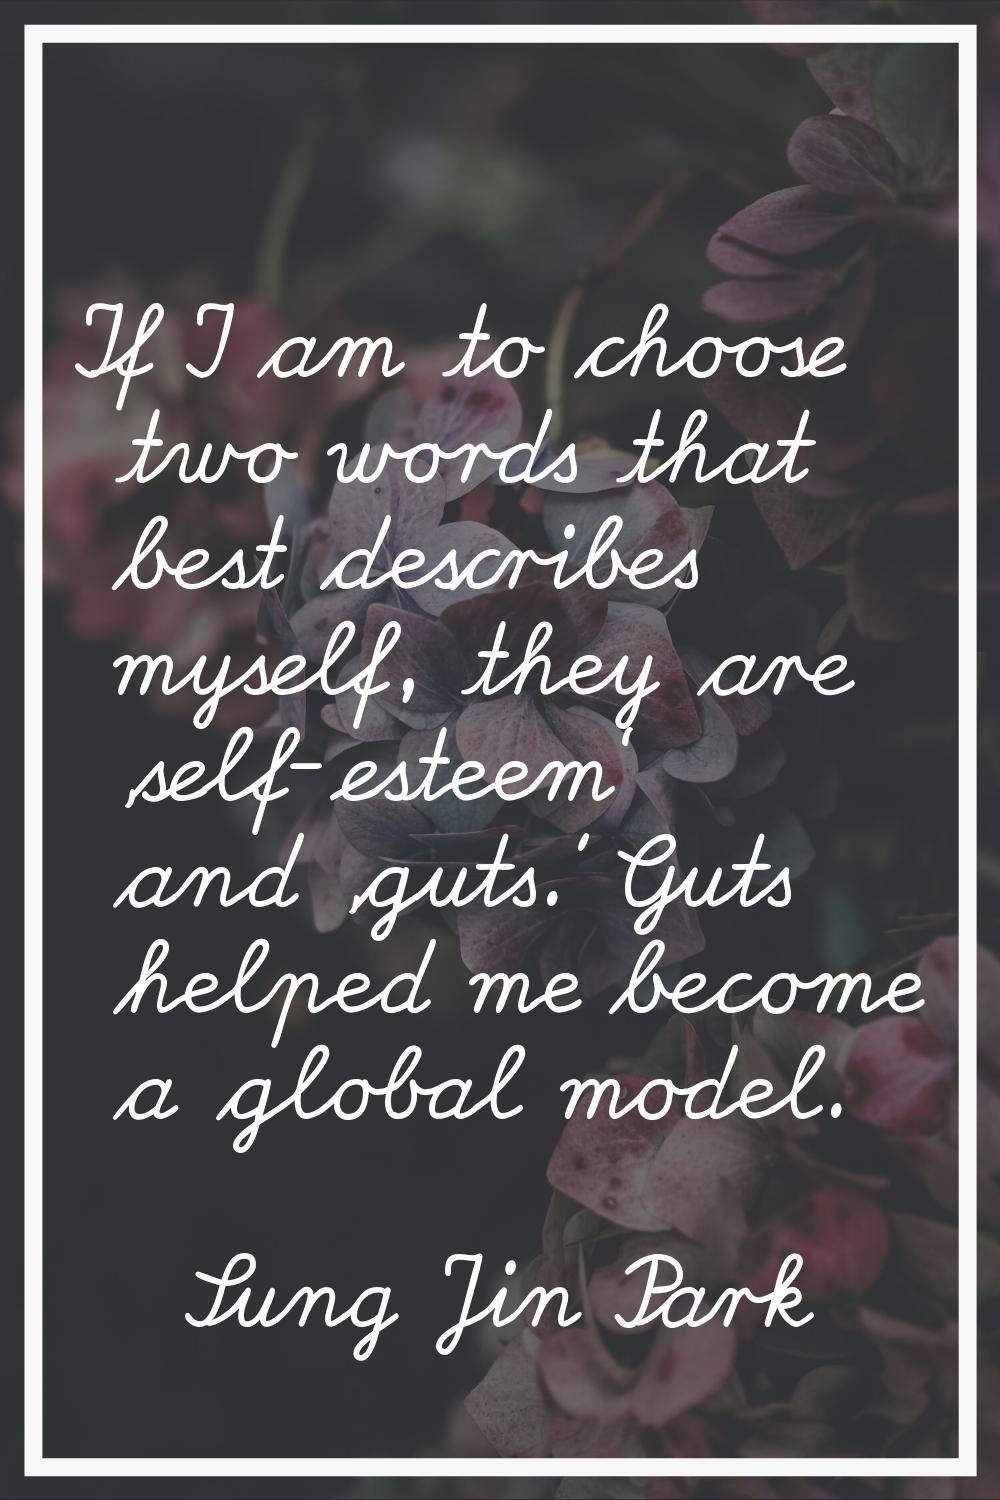 If I am to choose two words that best describes myself, they are 'self-esteem' and 'guts.' Guts hel